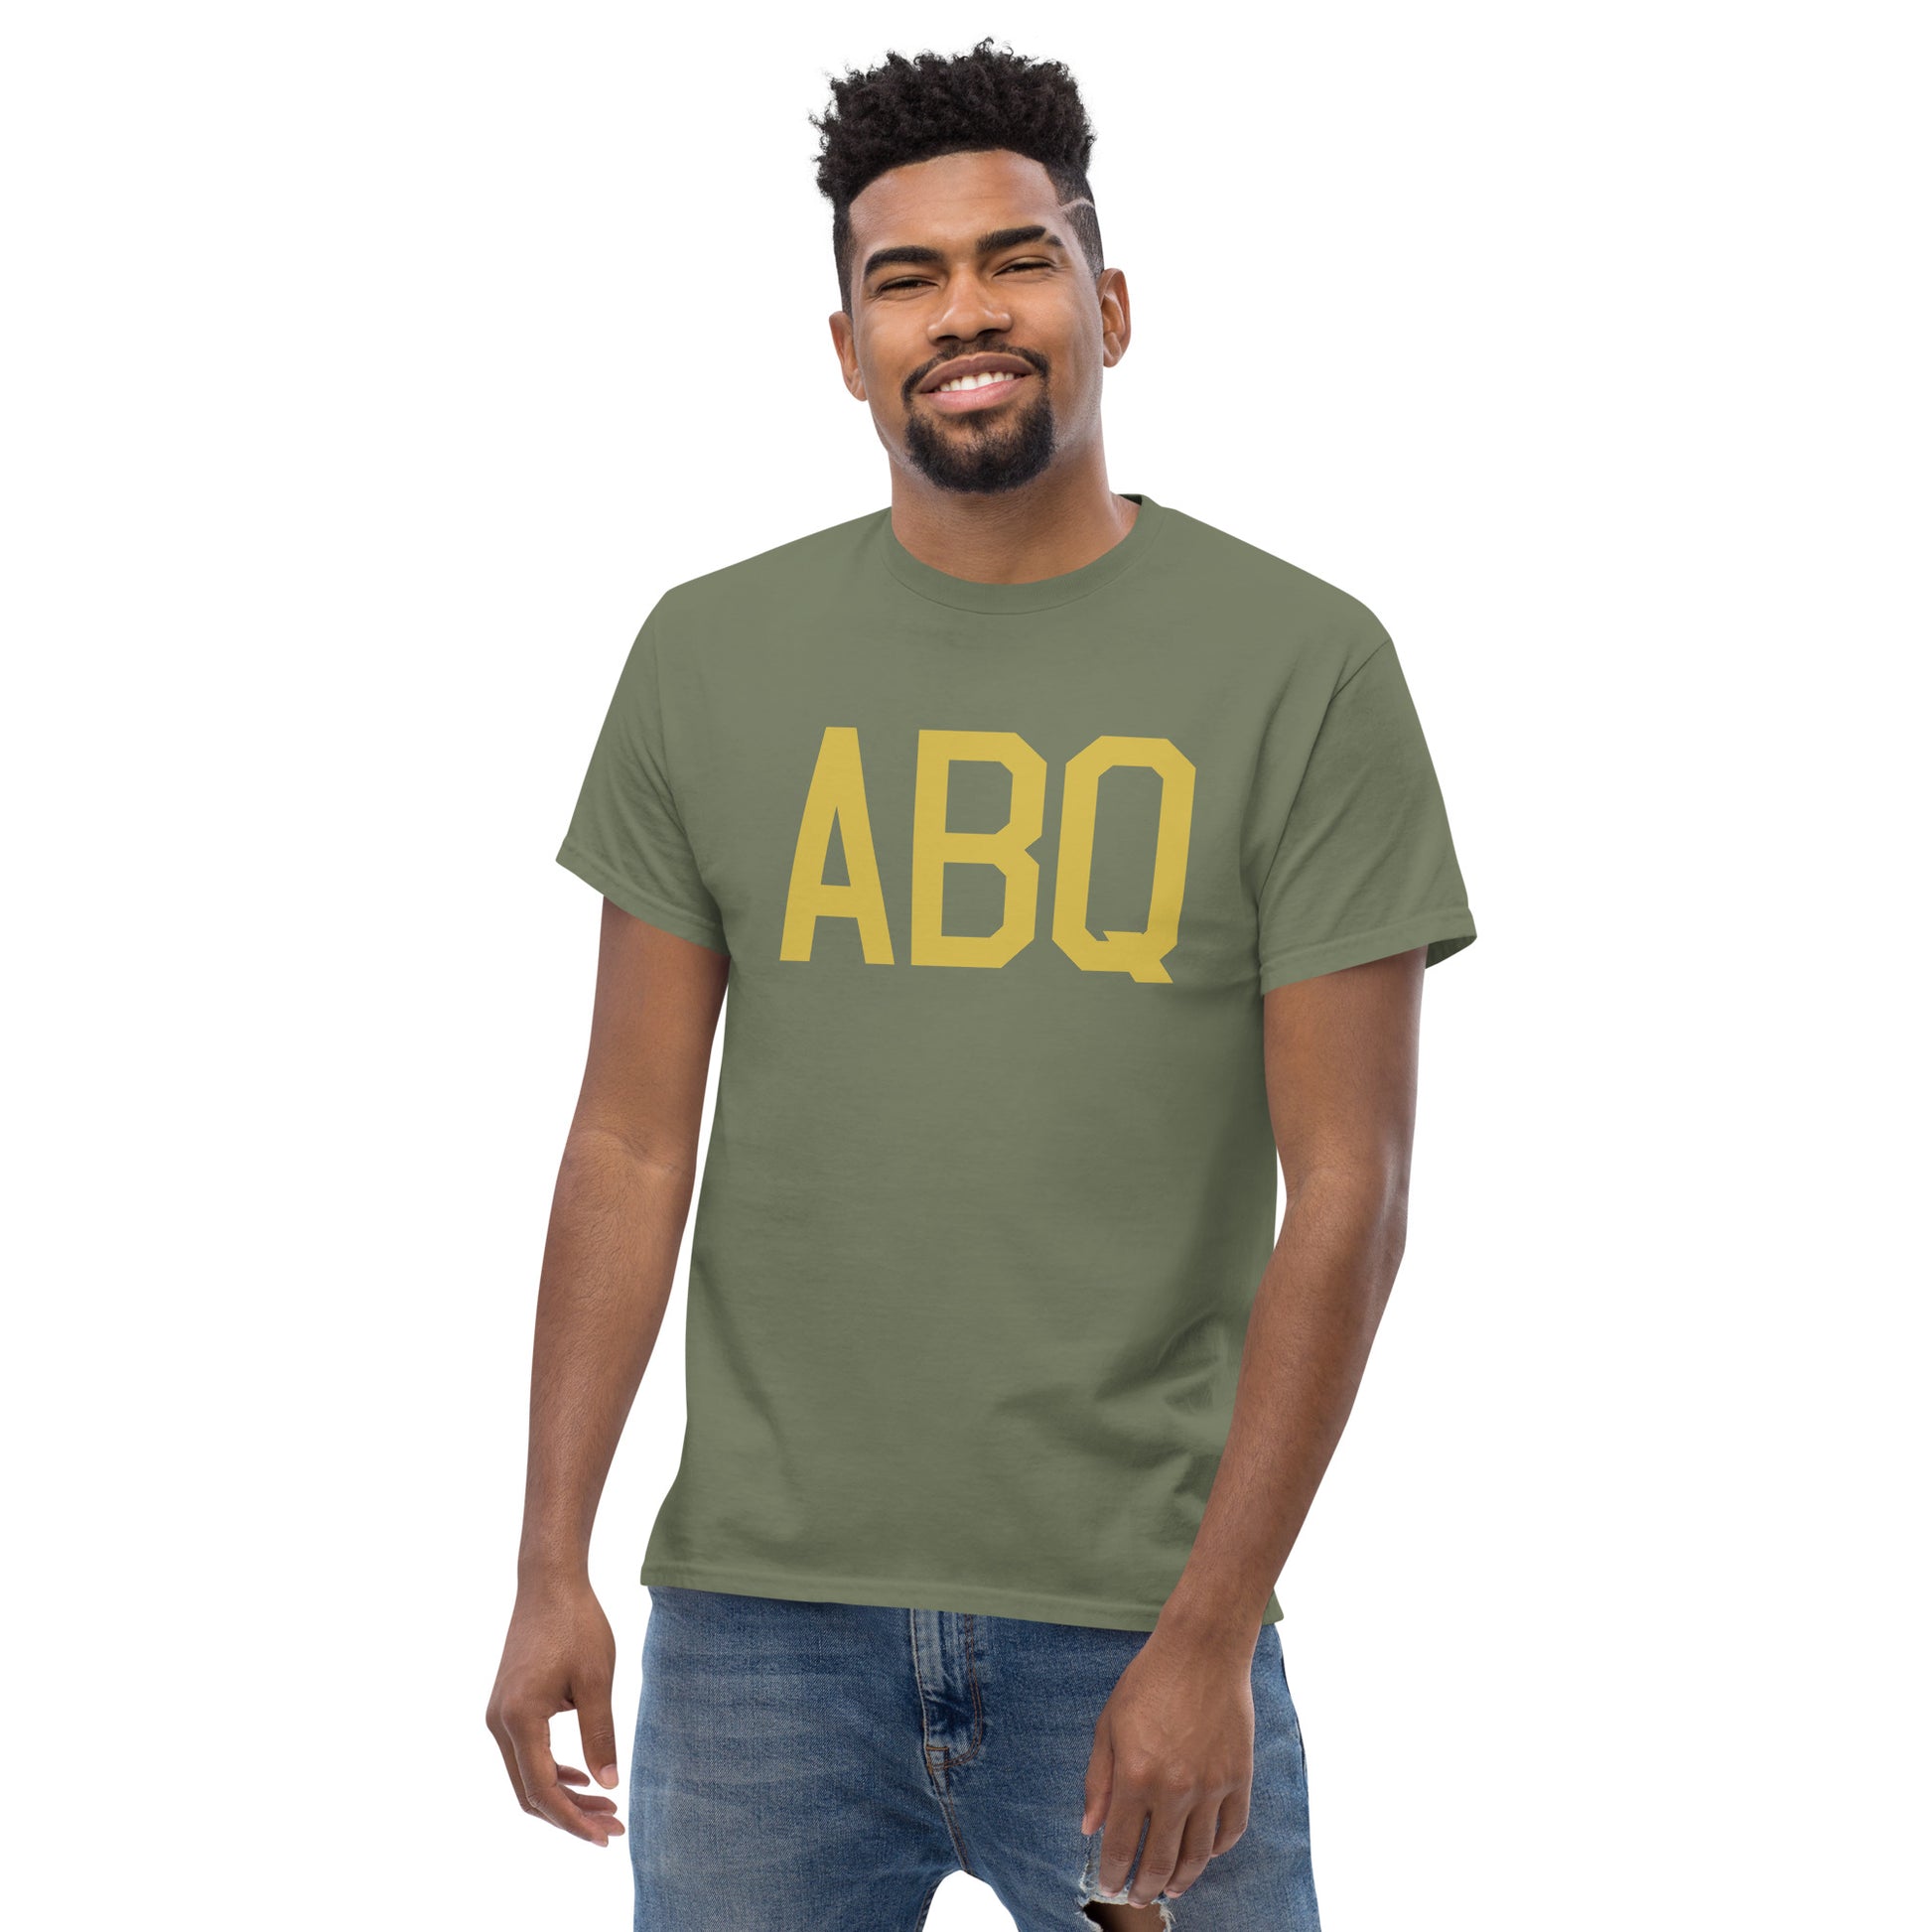 Aviation Enthusiast Men's Tee - Old Gold Graphic • ABQ Albuquerque • YHM Designs - Image 06